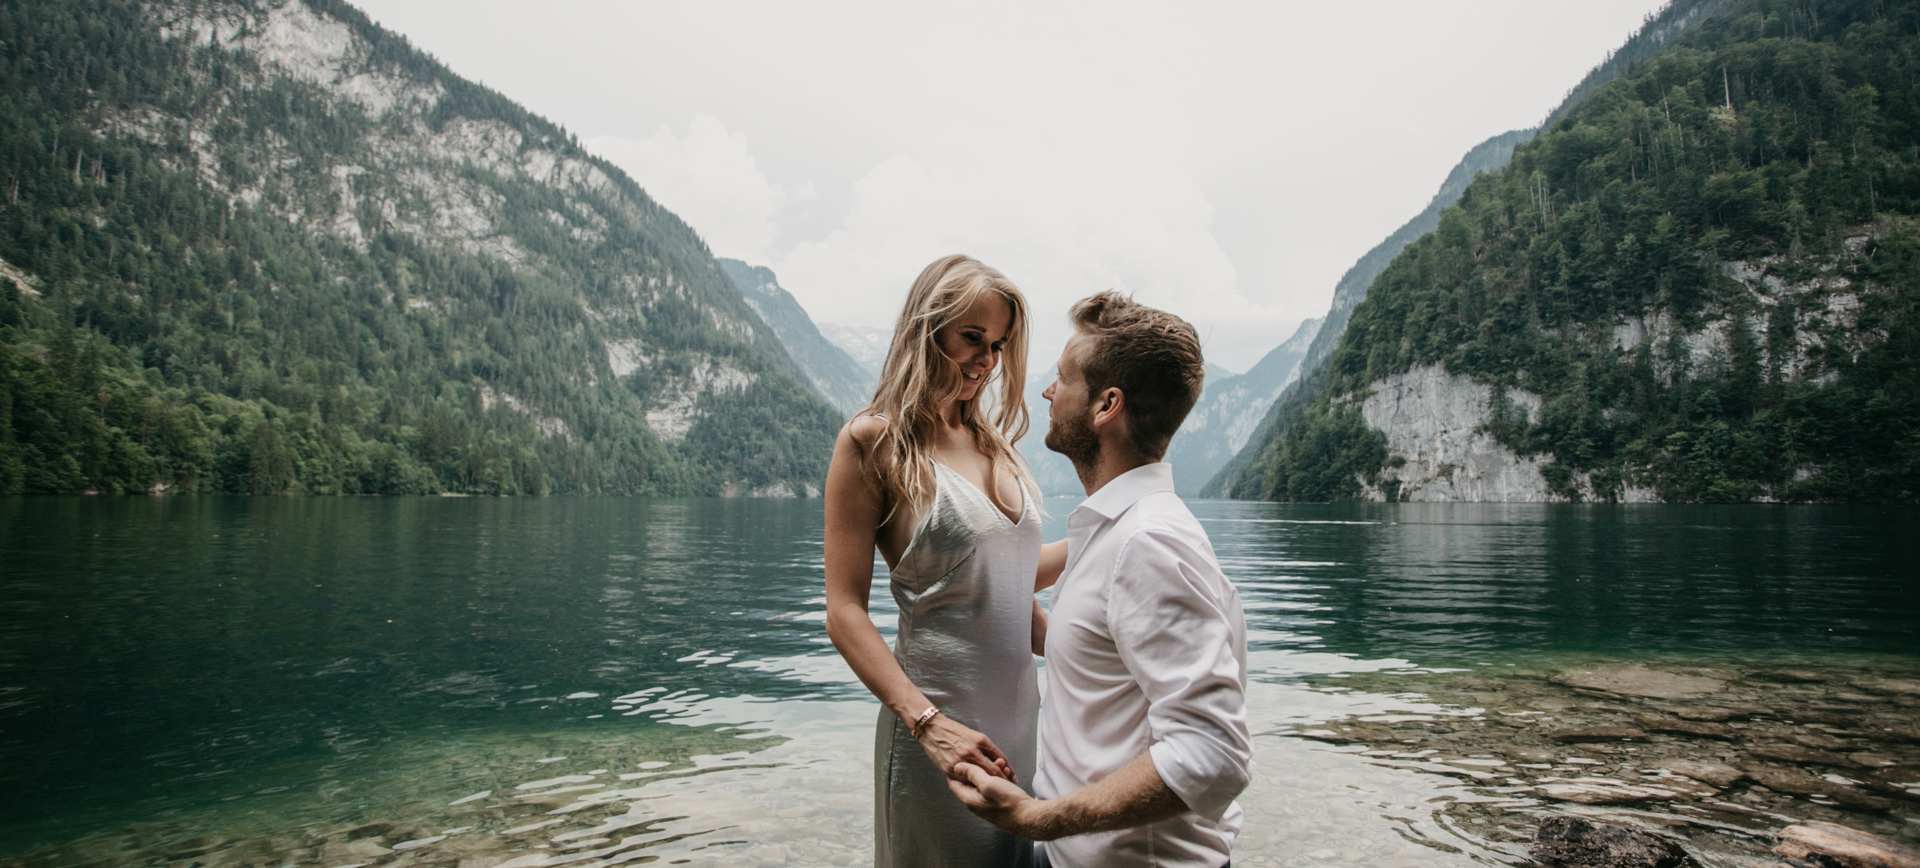 mountain couple photoshoot at lake Königessee in Germany